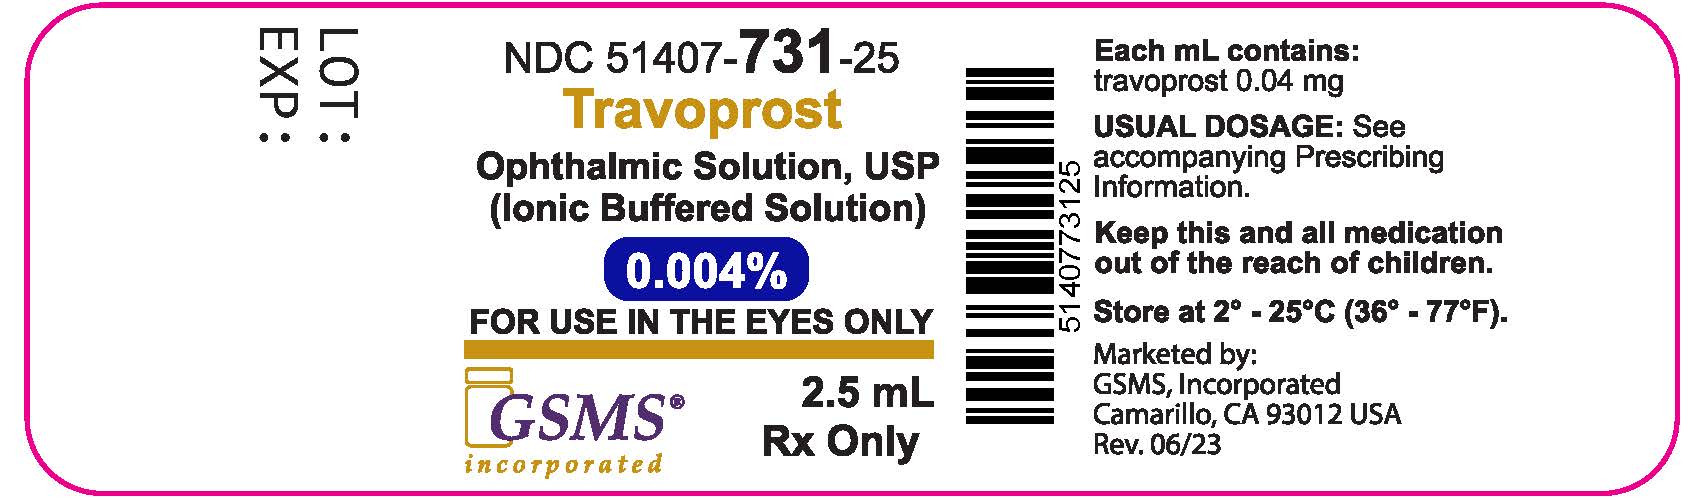 51407-731-25OL - TRAVOPROST OS 0.004pct - 2.5mL container - Rev 06-23.jpg